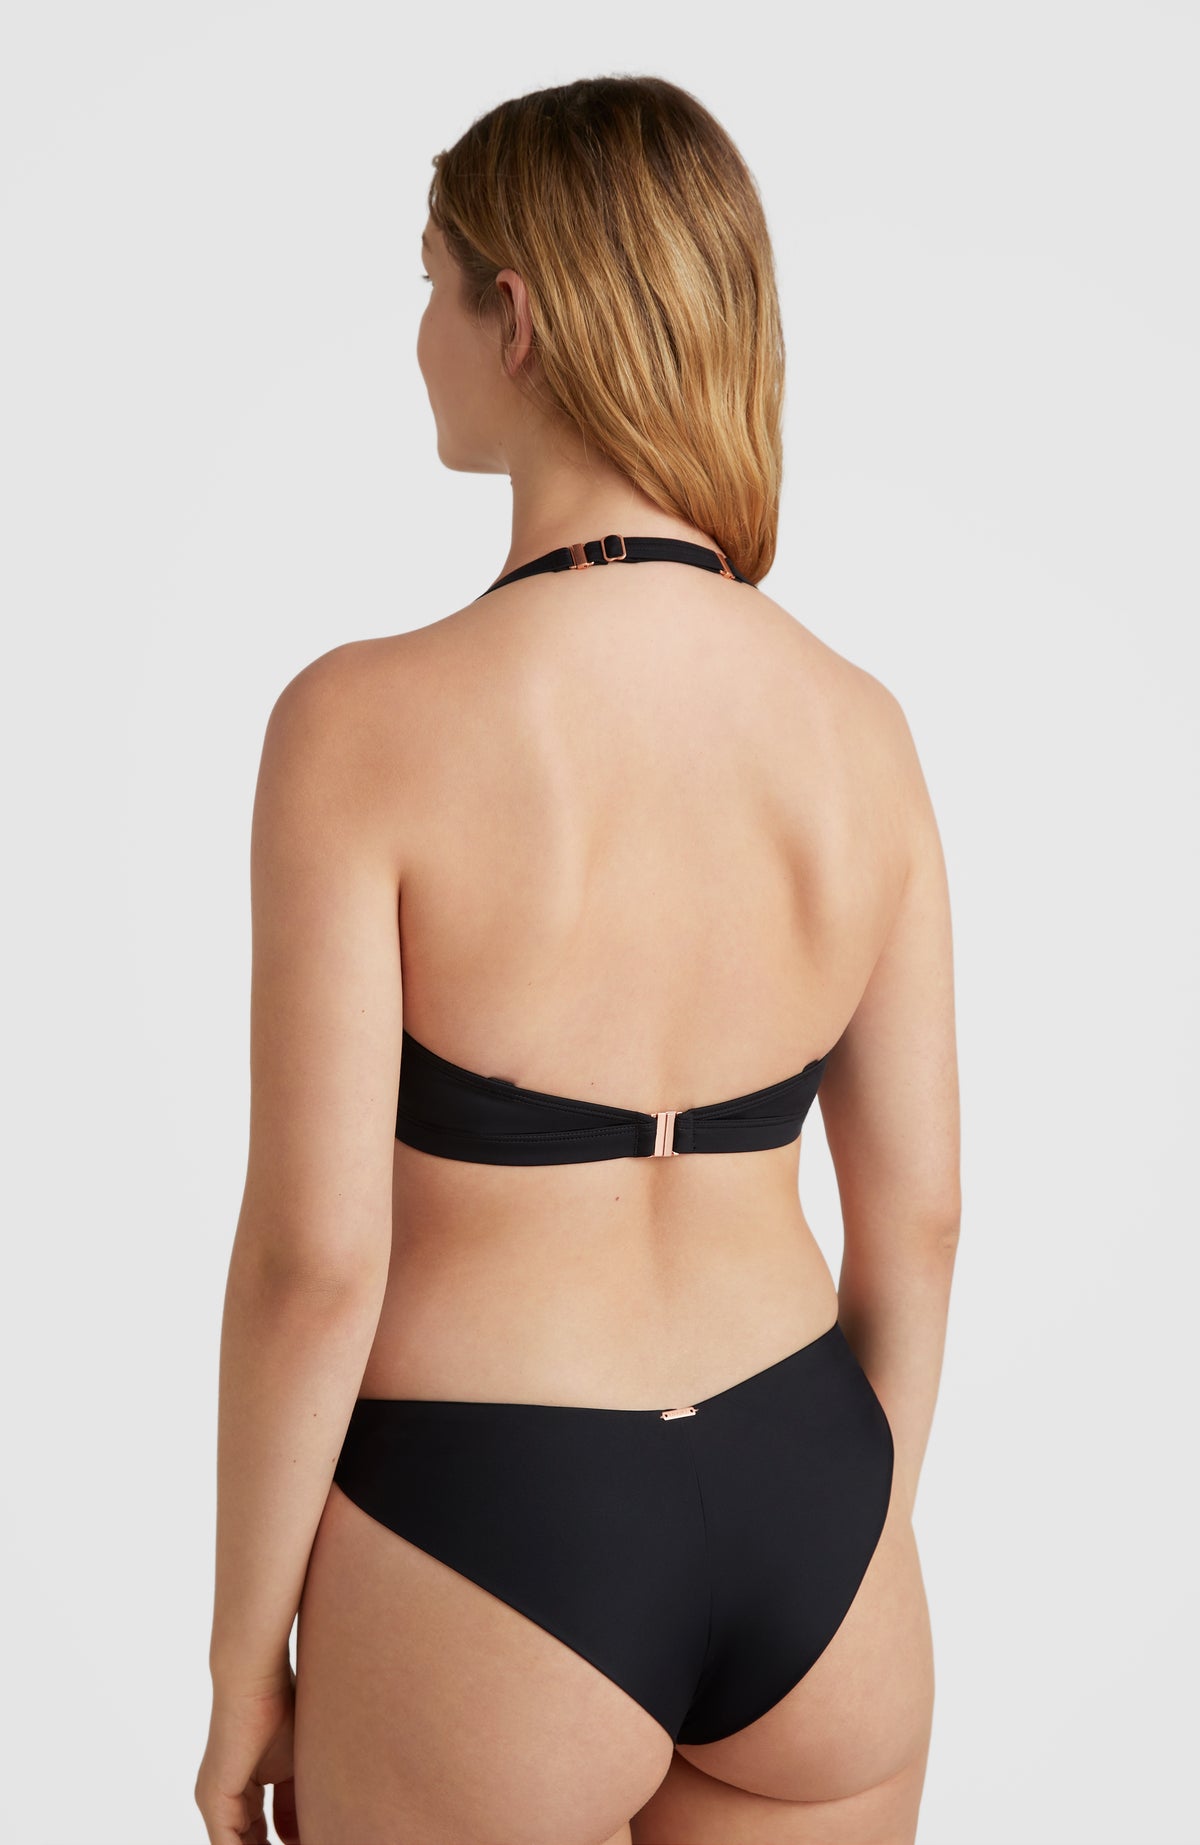 Tommy Hilfiger Bra - Triangle - Black » New Products Every Day